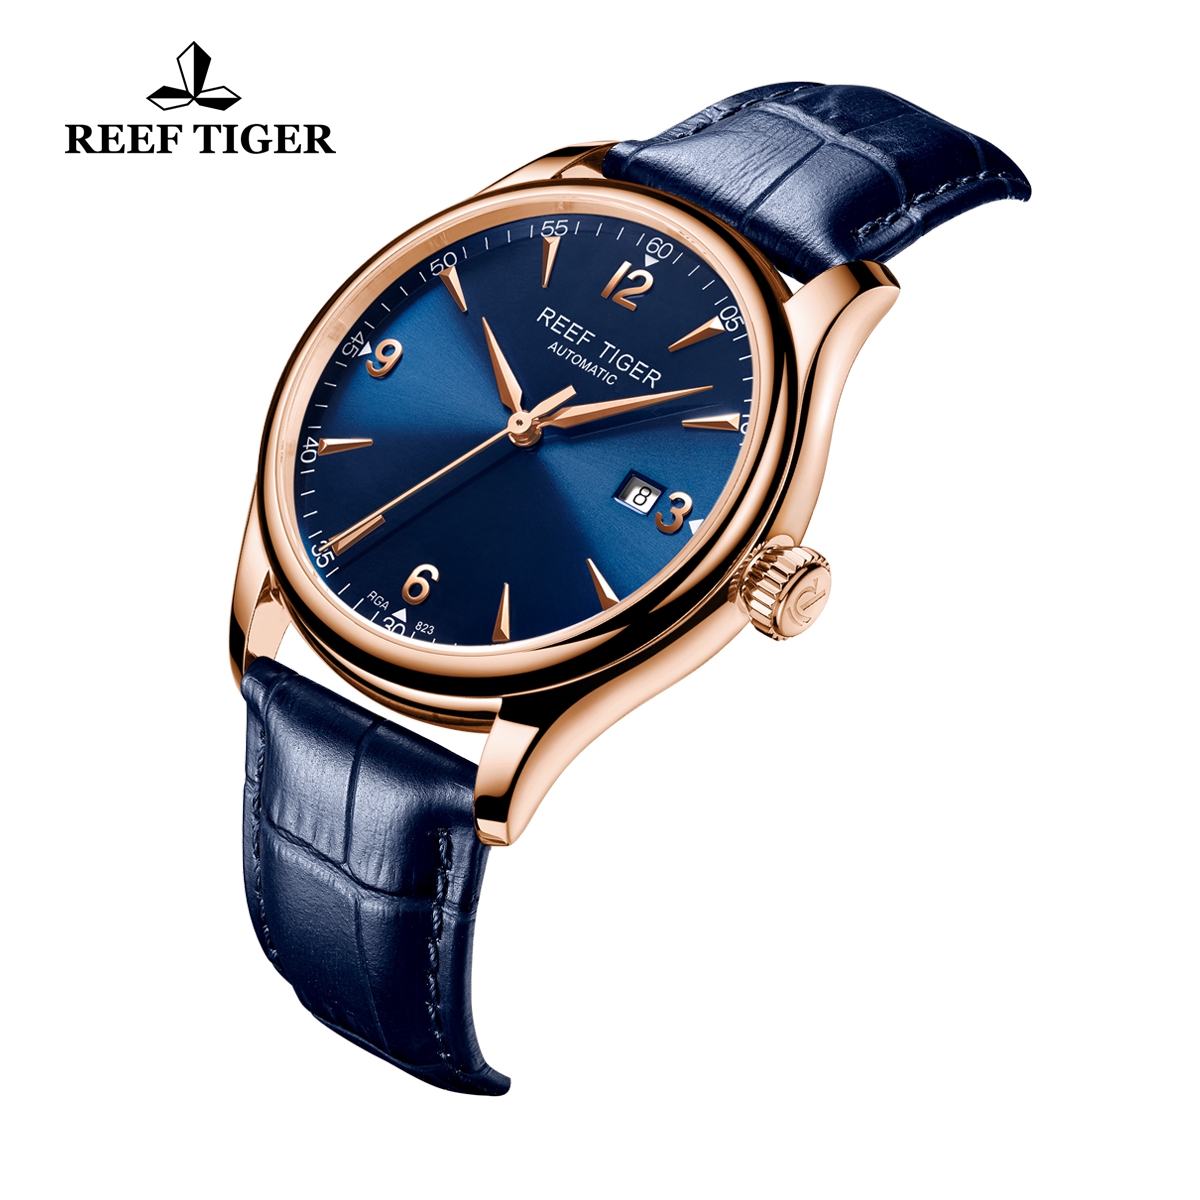 Reef Tiger Heritage Dress Automatic Watch Blue Dial Calfskin Leather Strap RGA823G-PLL